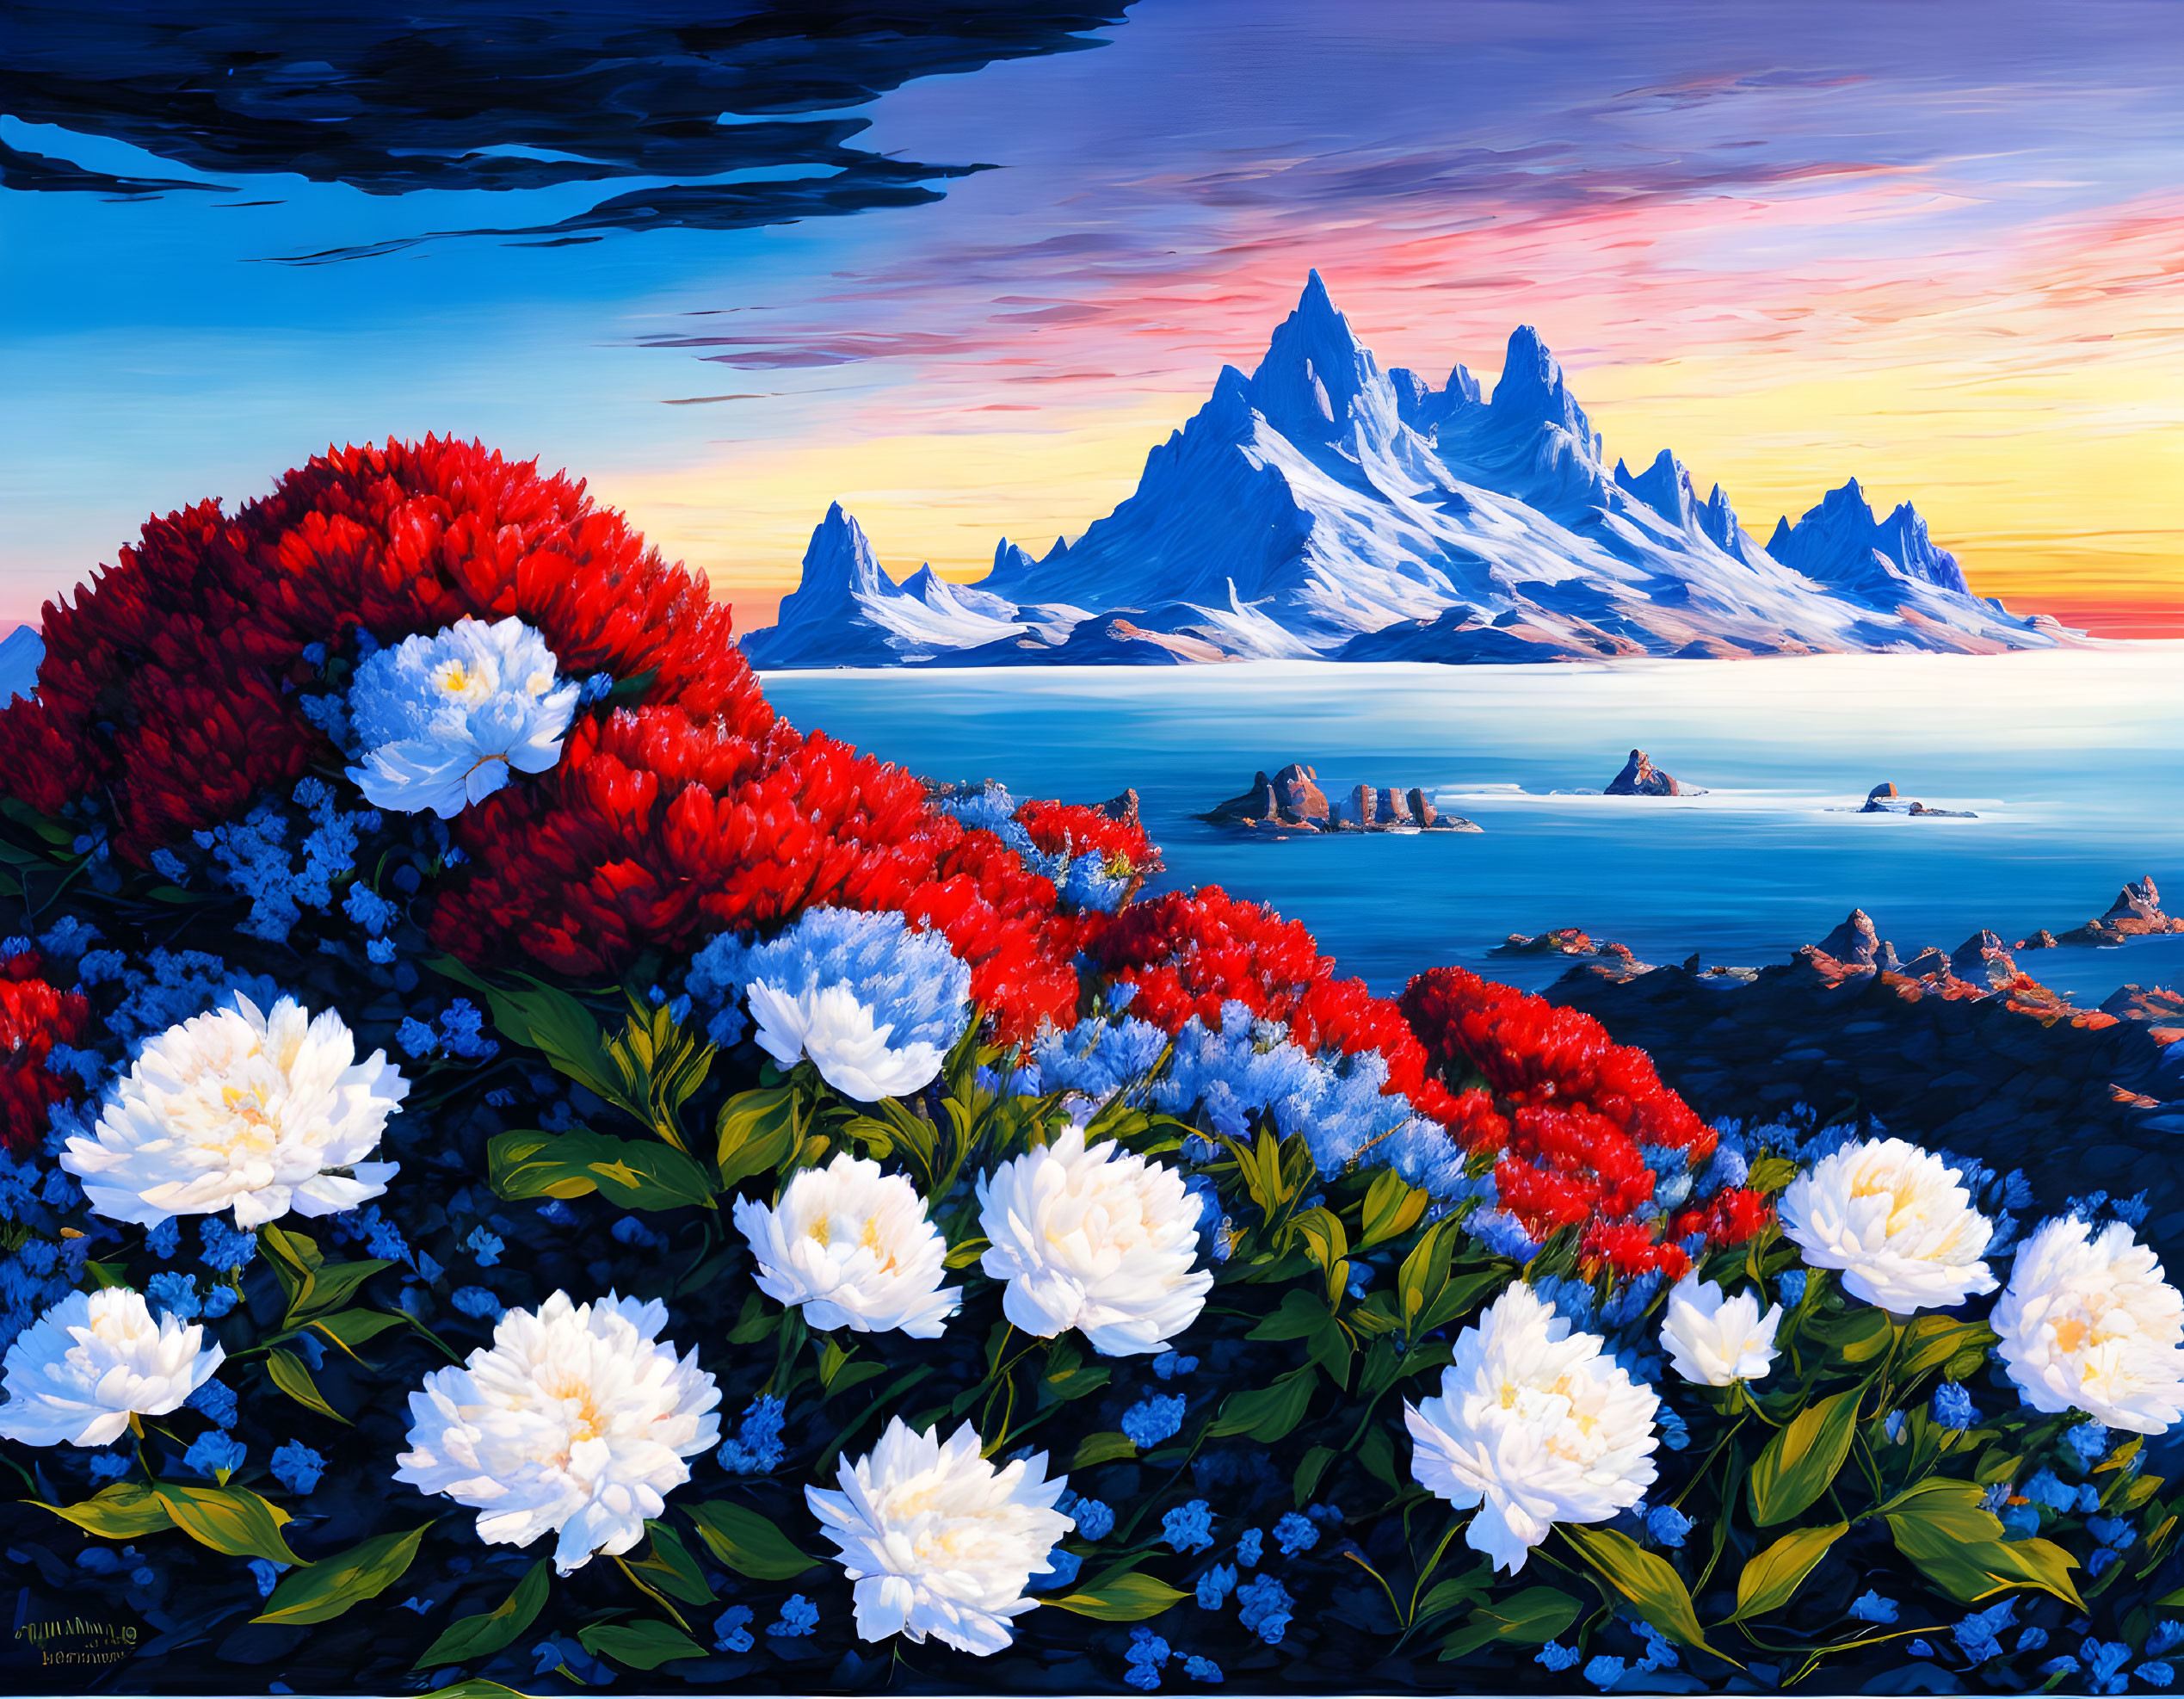 Colorful painting: White and red flowers with snow-capped mountains and sunset sky